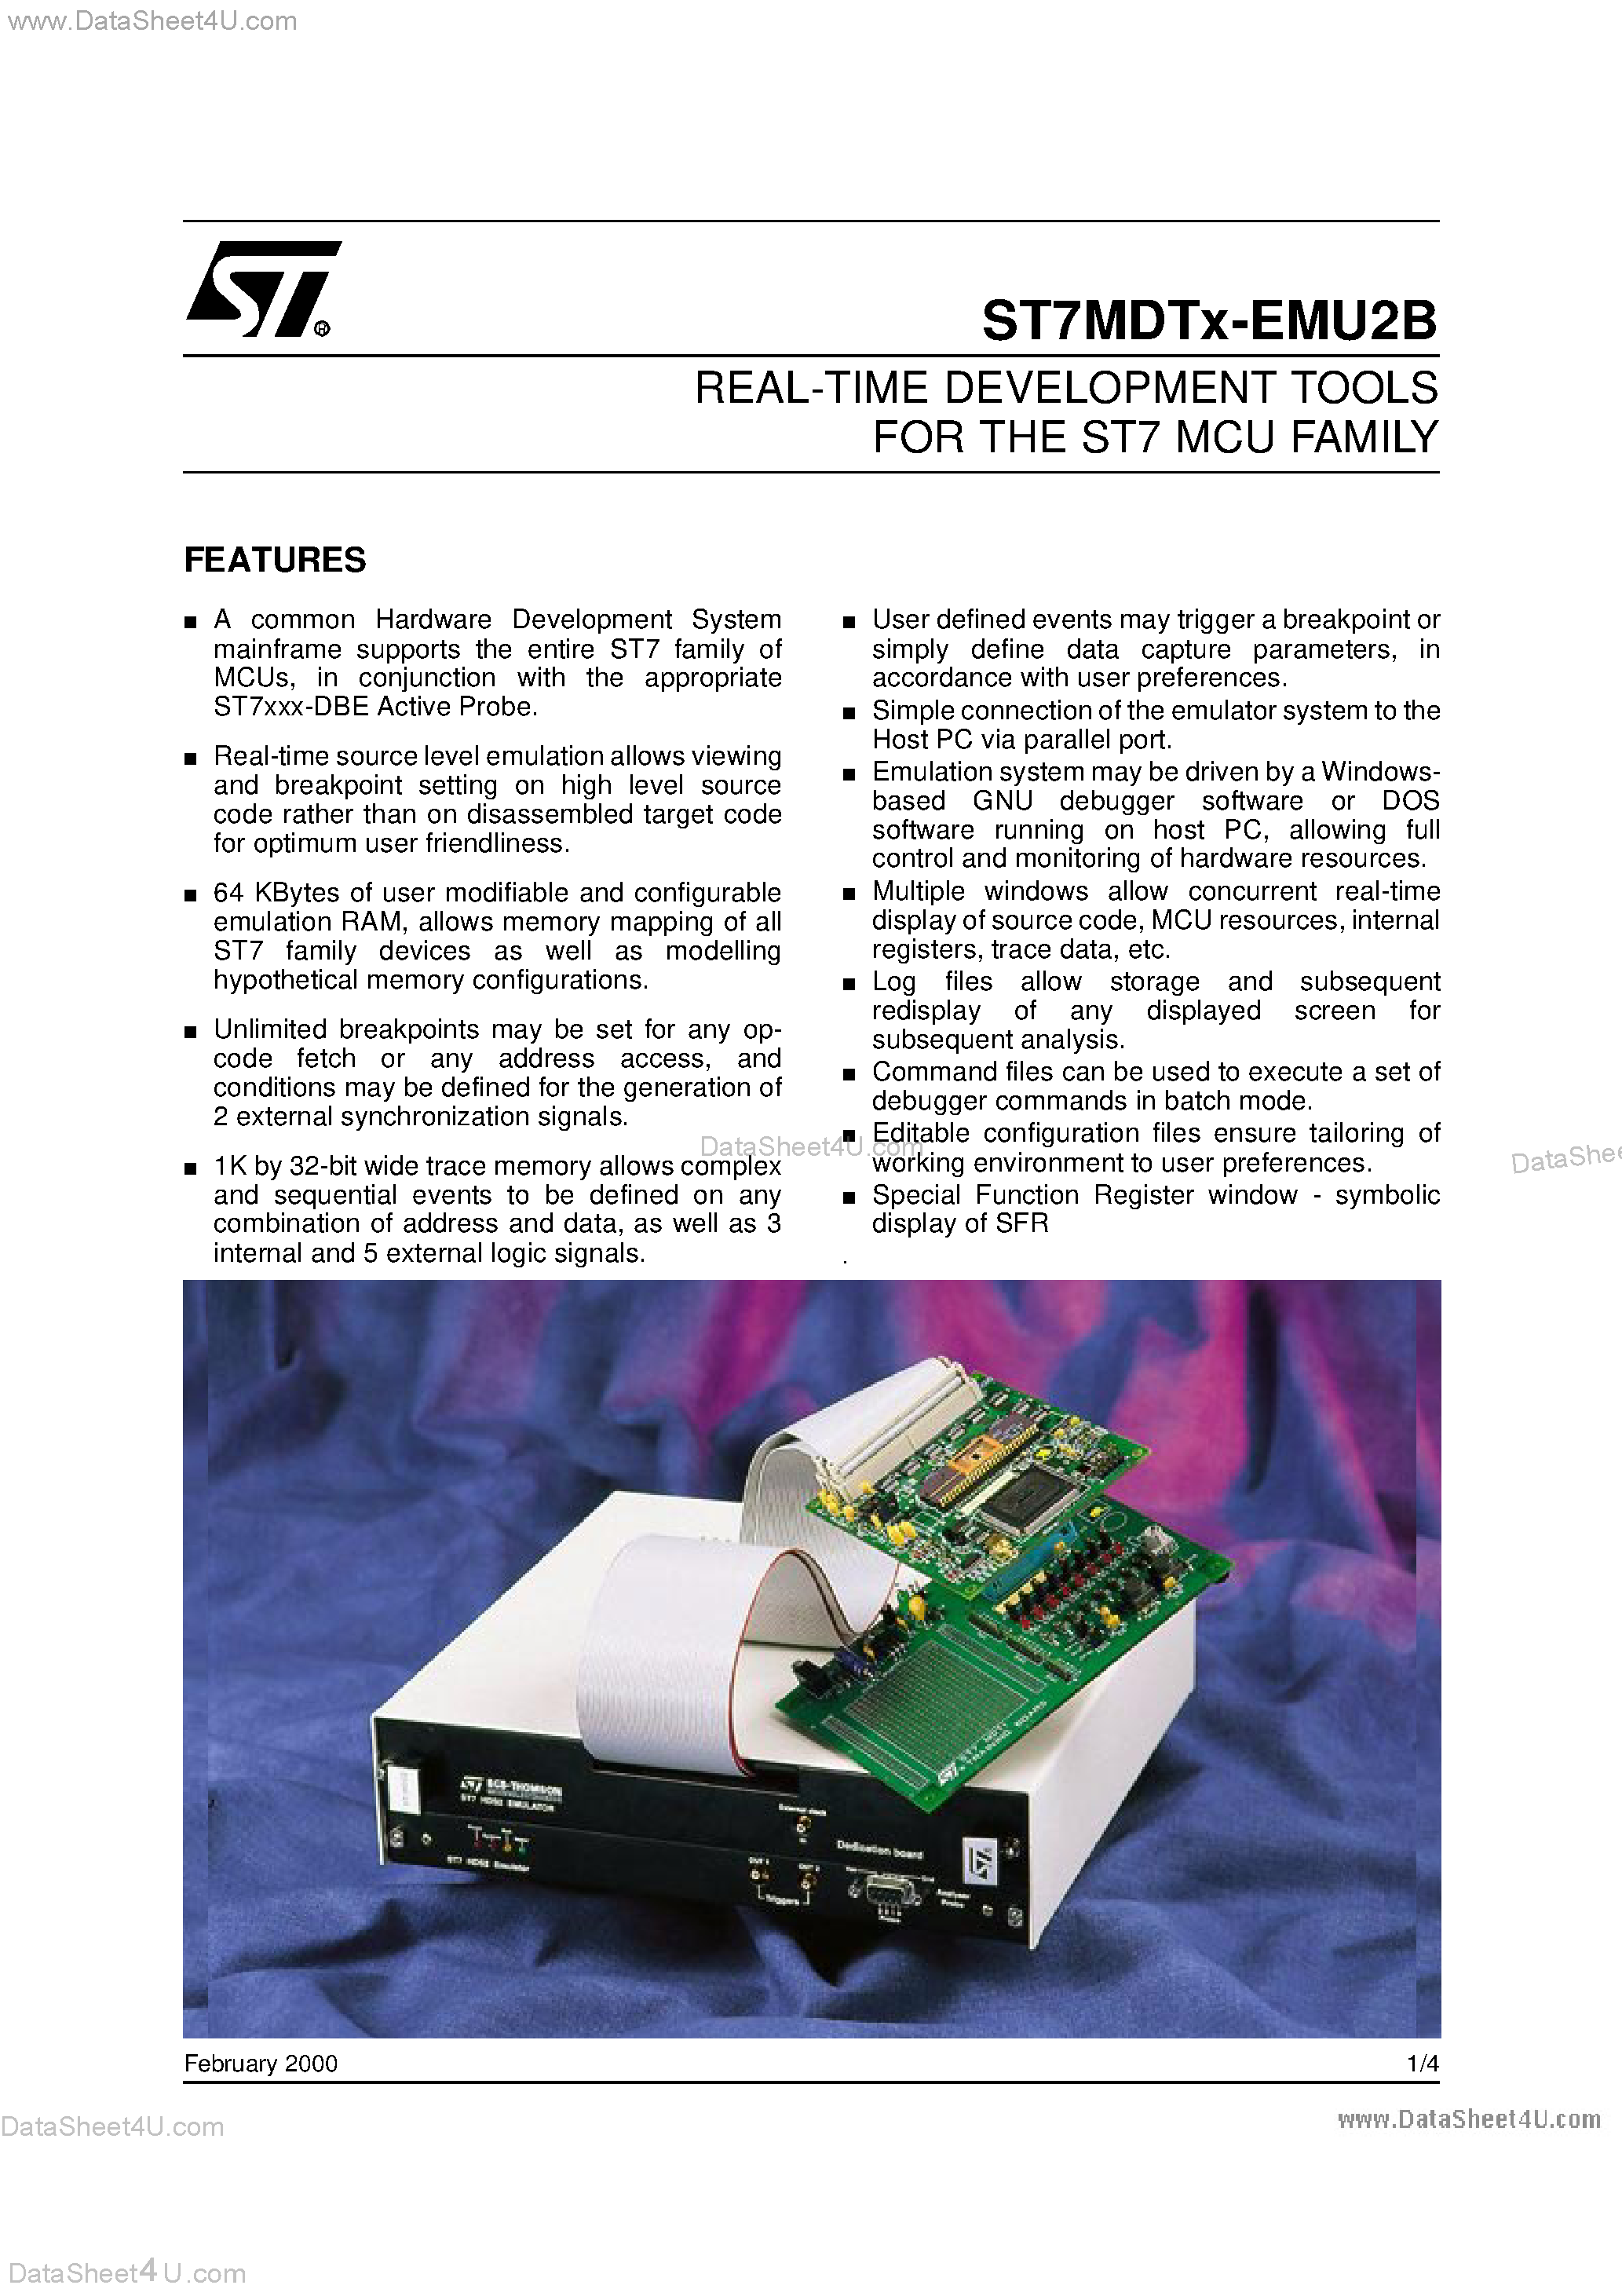 Datasheet ST7MDT1-EMU2B - REAL-TIME DEVELOPMENT TOOLS FOR THE ST7 MCU FAMILY page 1